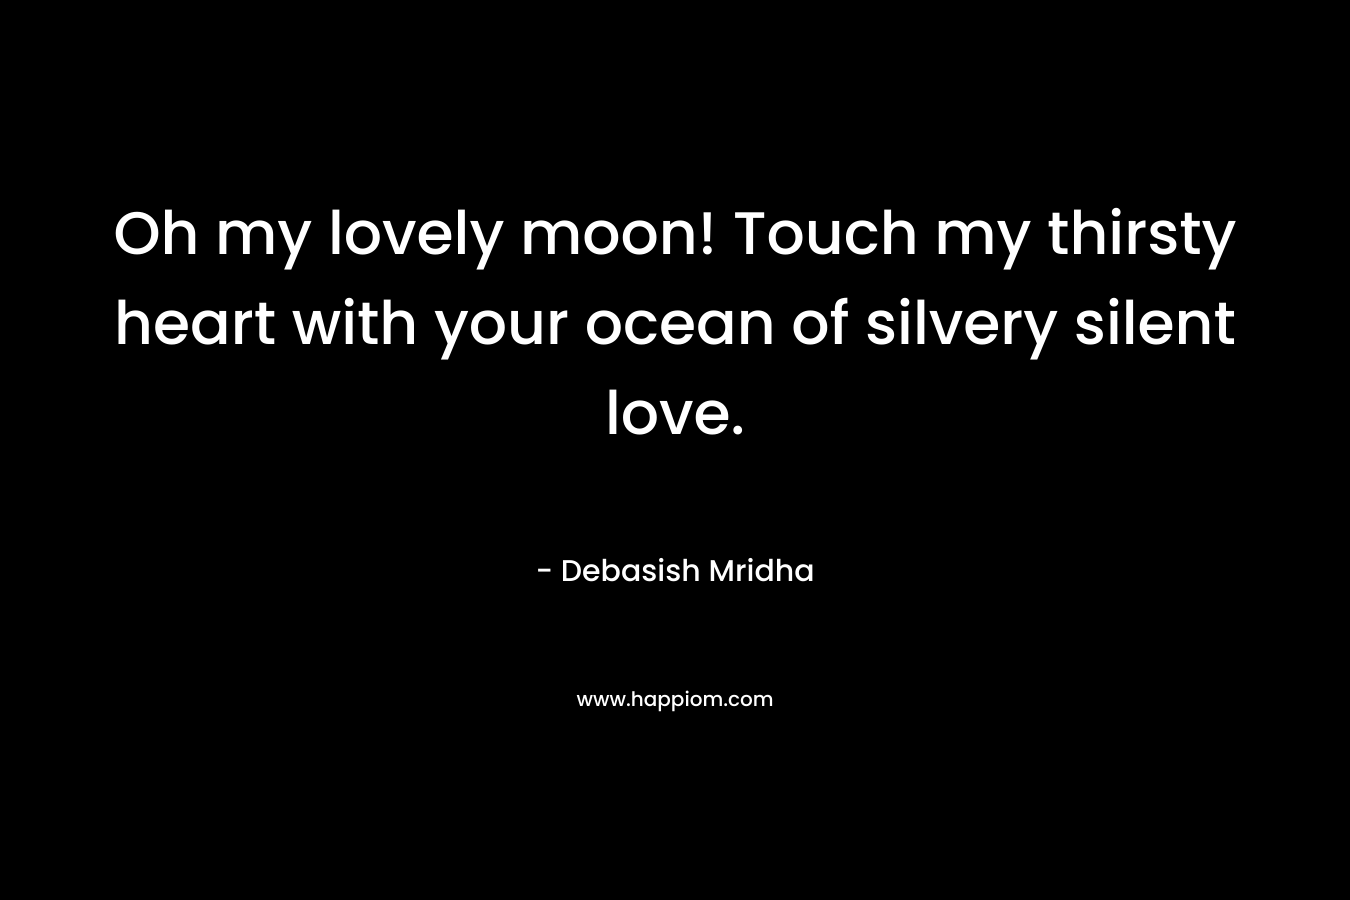 Oh my lovely moon! Touch my thirsty heart with your ocean of silvery silent love.